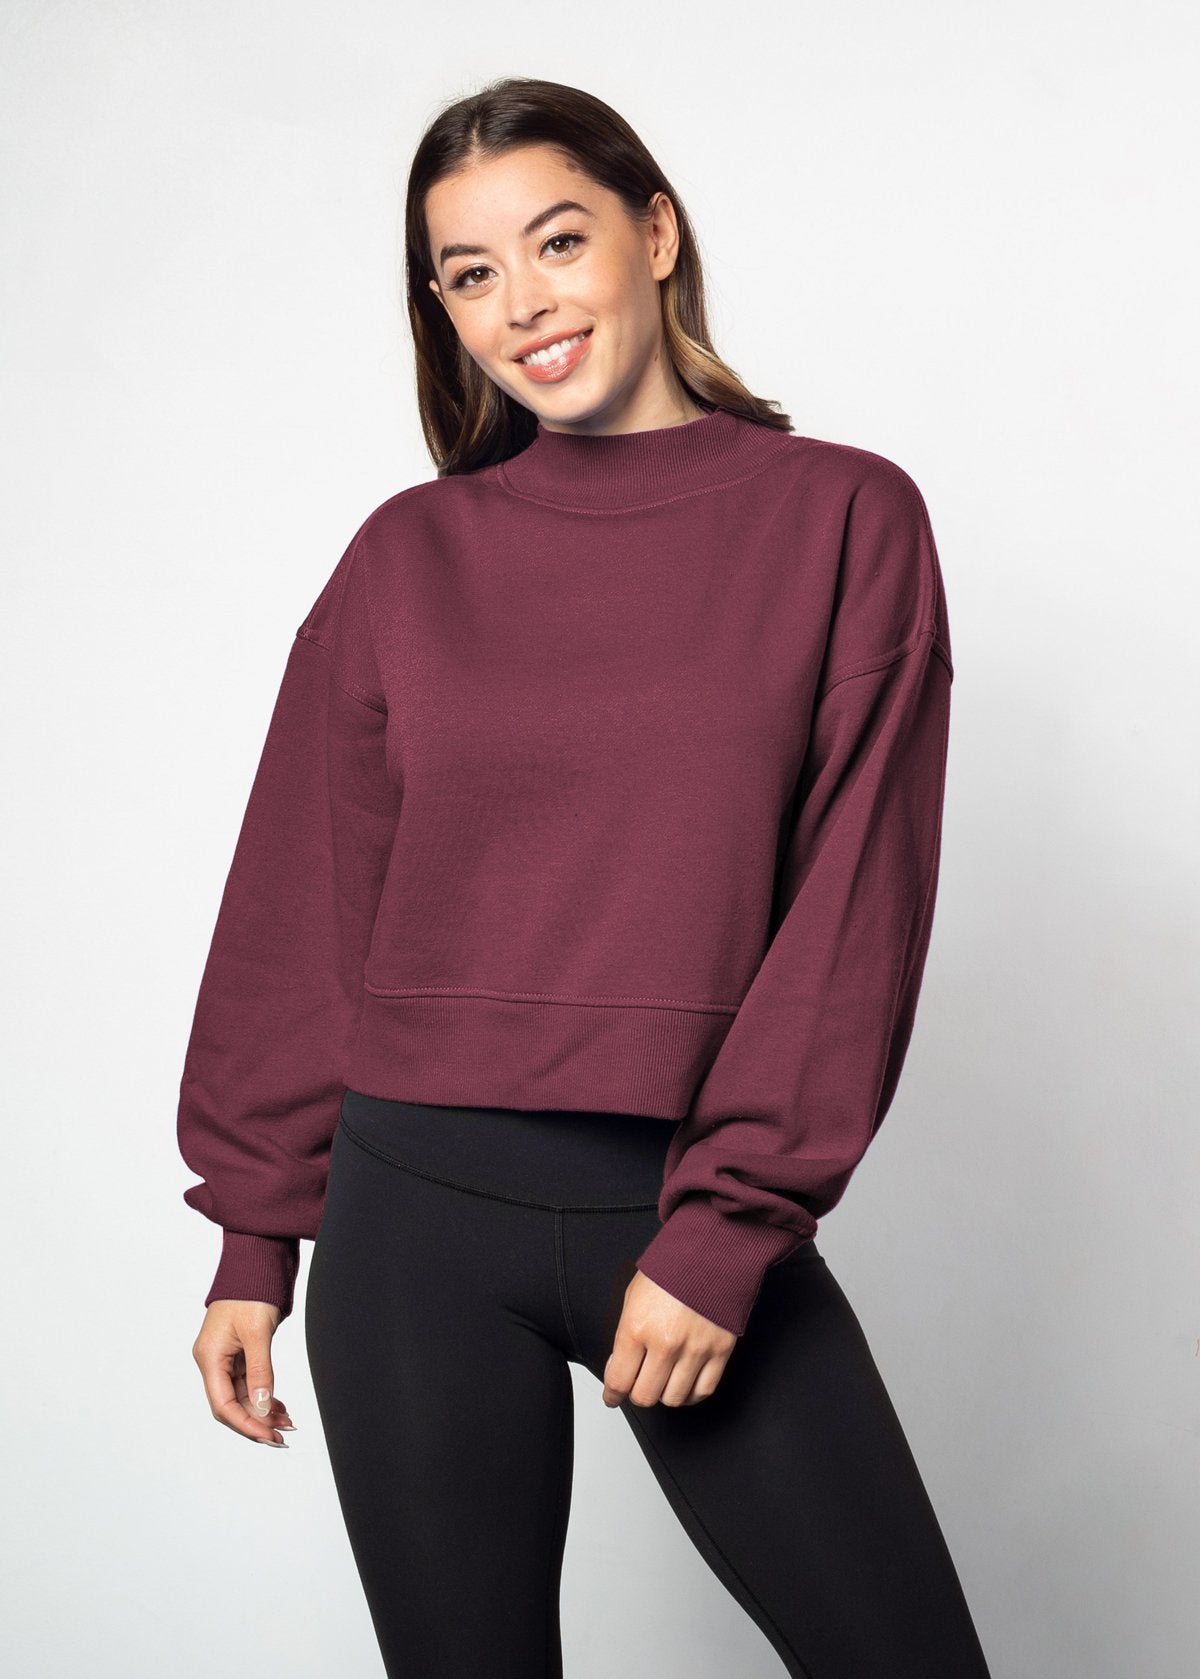 Maroon mockneck sweatshirt with dropped shoulders, balloon sleeves, ribbed neck, sleeves and hem. Cropped relaxed silhouette